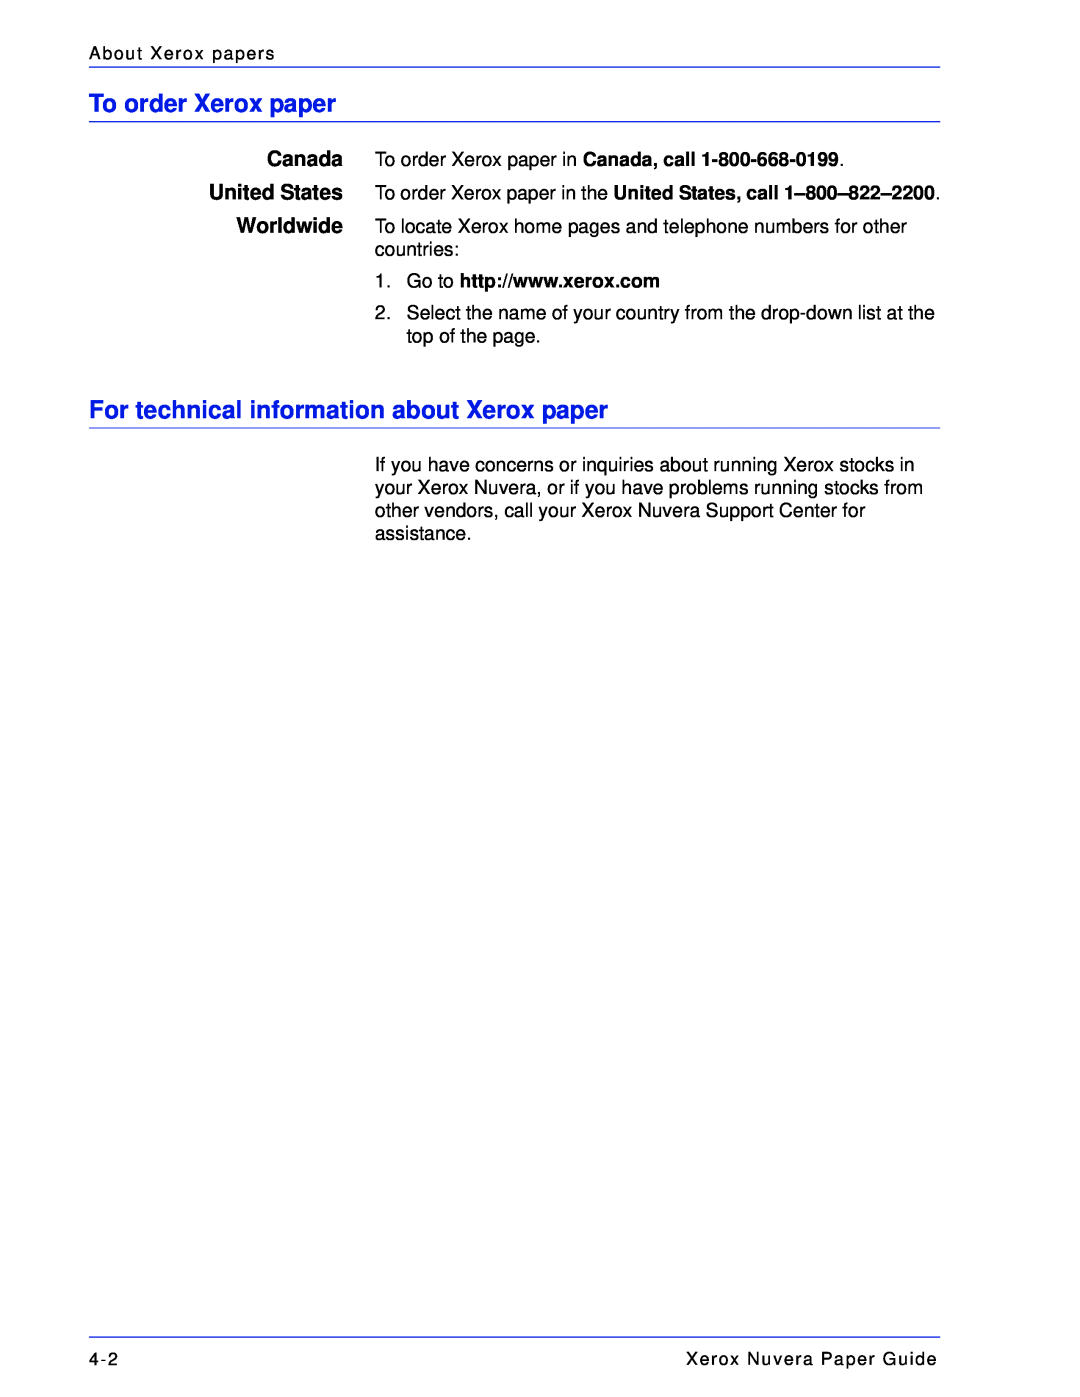 Xerox 701P28020 manual To order Xerox paper, For technical information about Xerox paper 